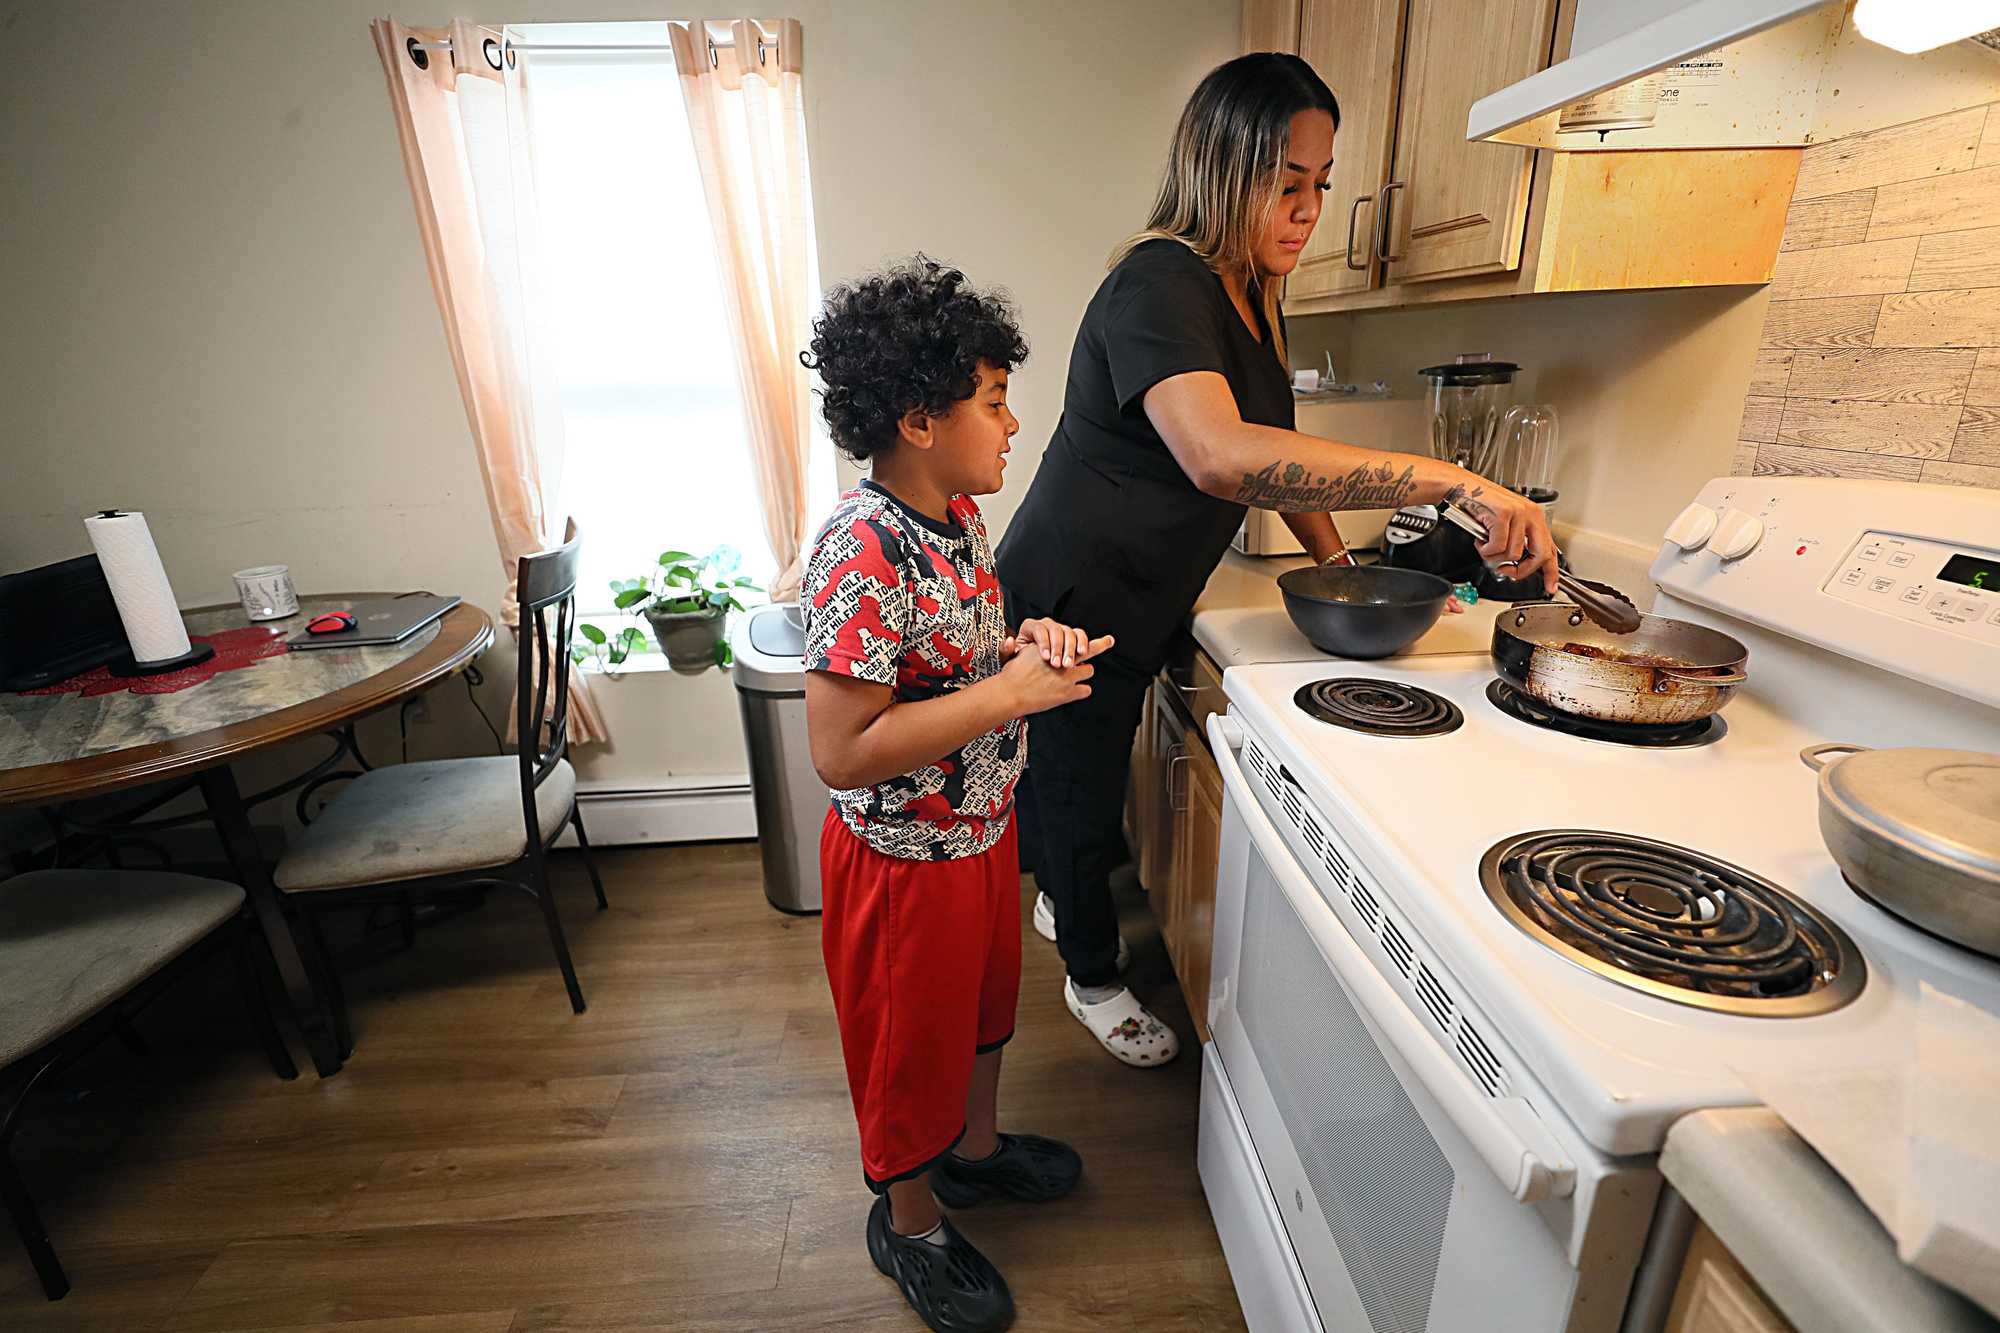 Gardenia Osorio and her 9-year-old son, Isaac, made dinner together in the kitchen of their Lowell apartment.